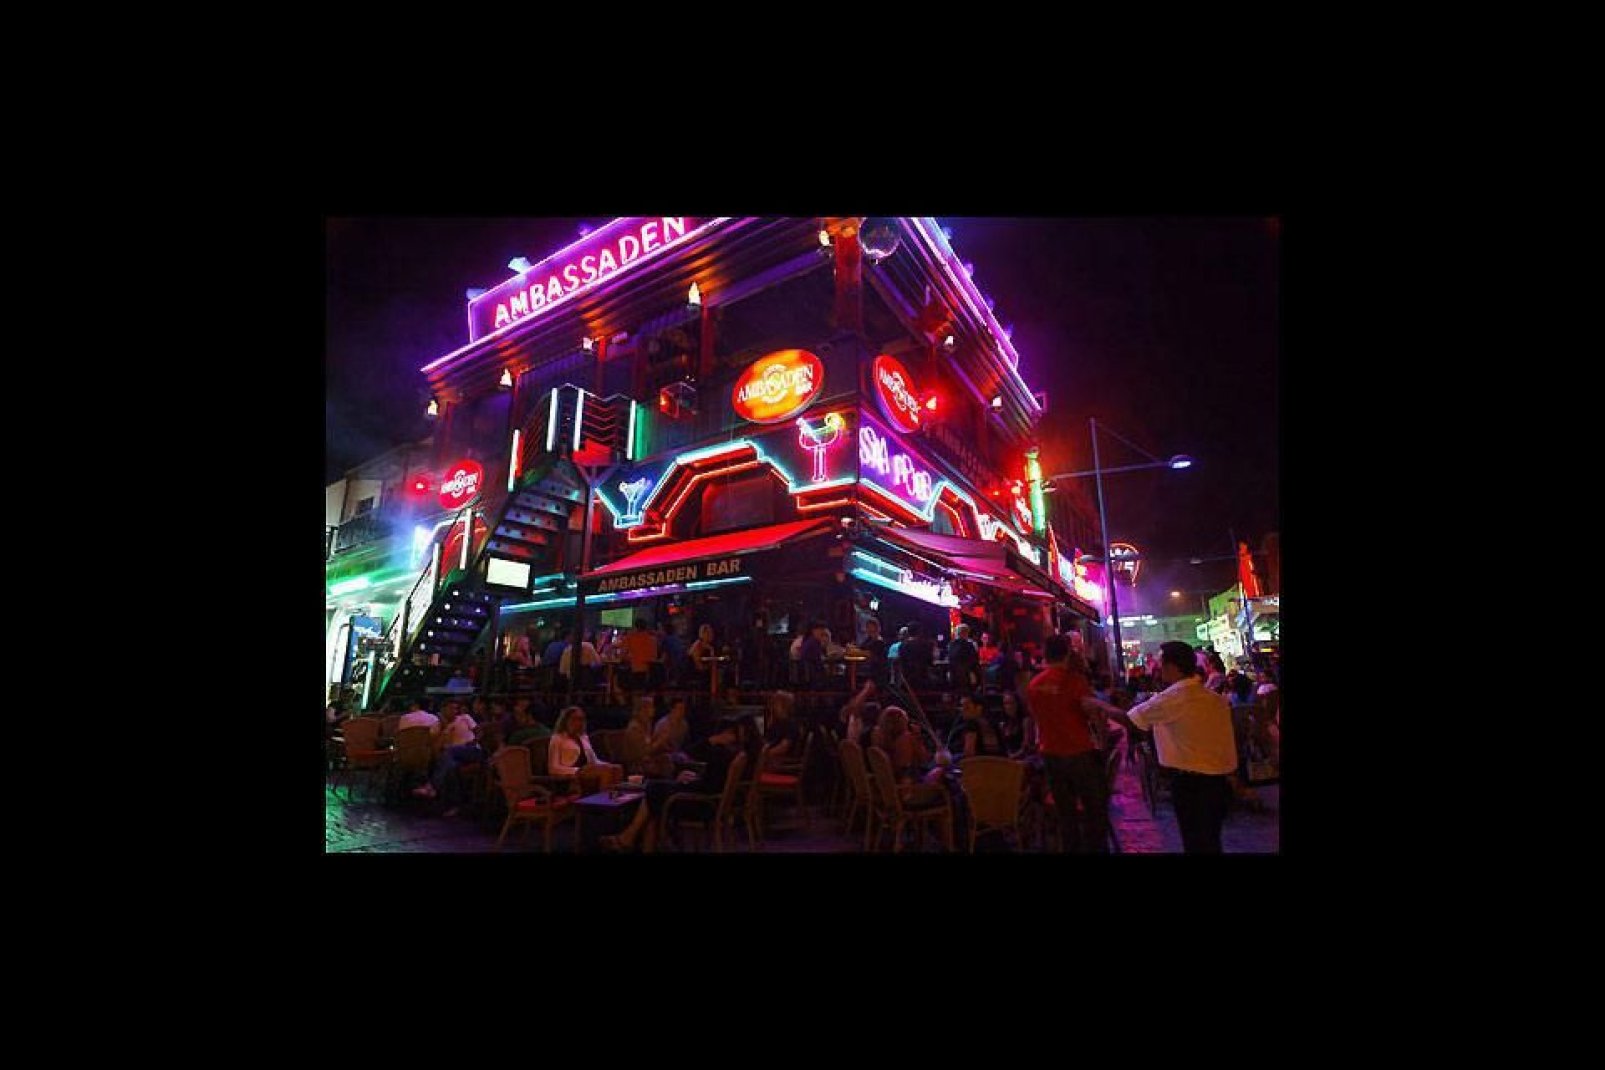 Ayia Napa is famous for its nightlife; in the old city center, whole streets are devoted to nightclubs and bars.